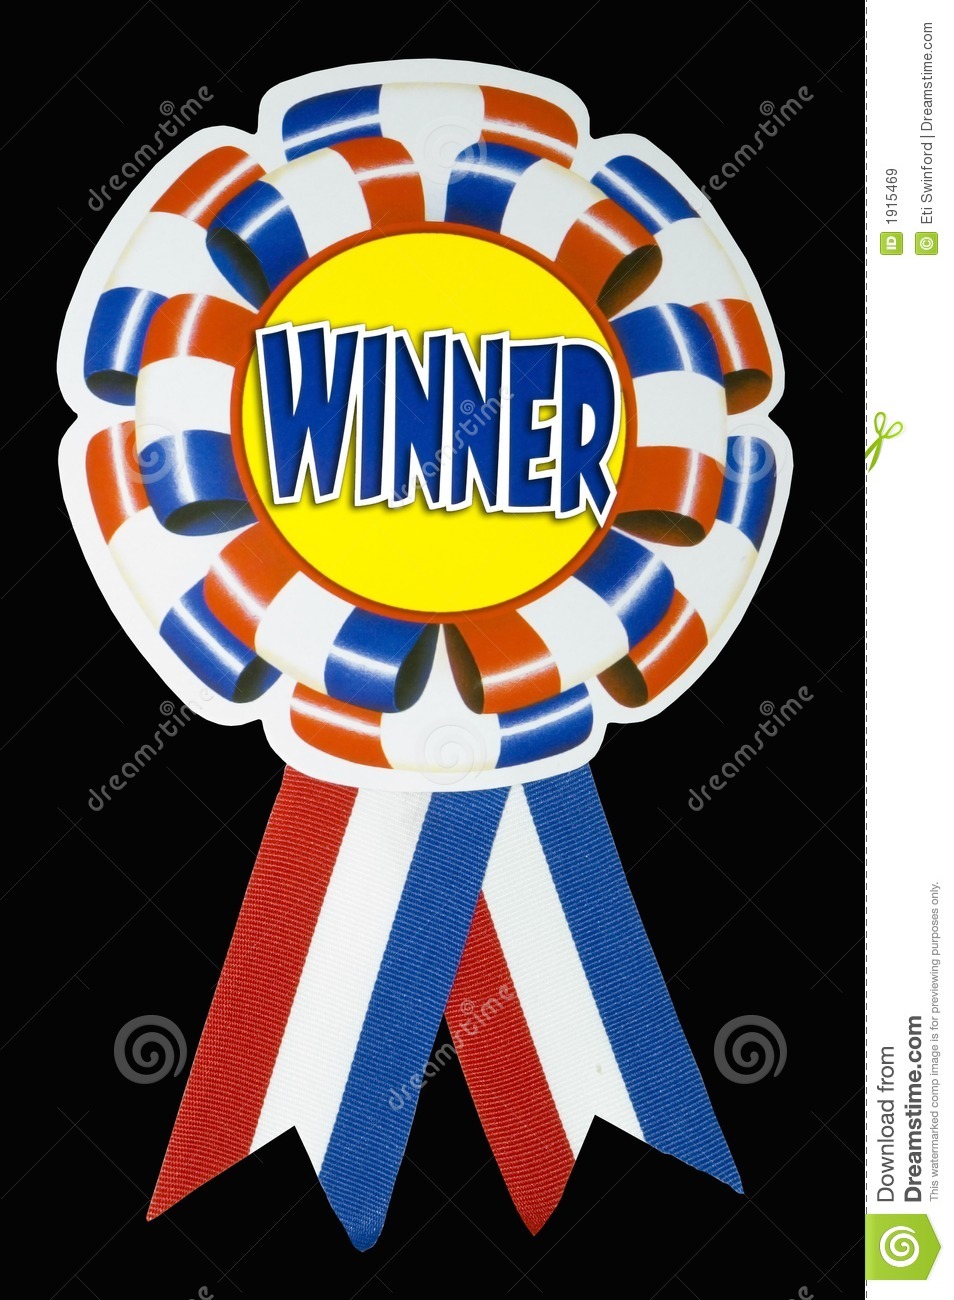 Winner Ribbon   With Clipping Path Royalty Free Stock Images   Image